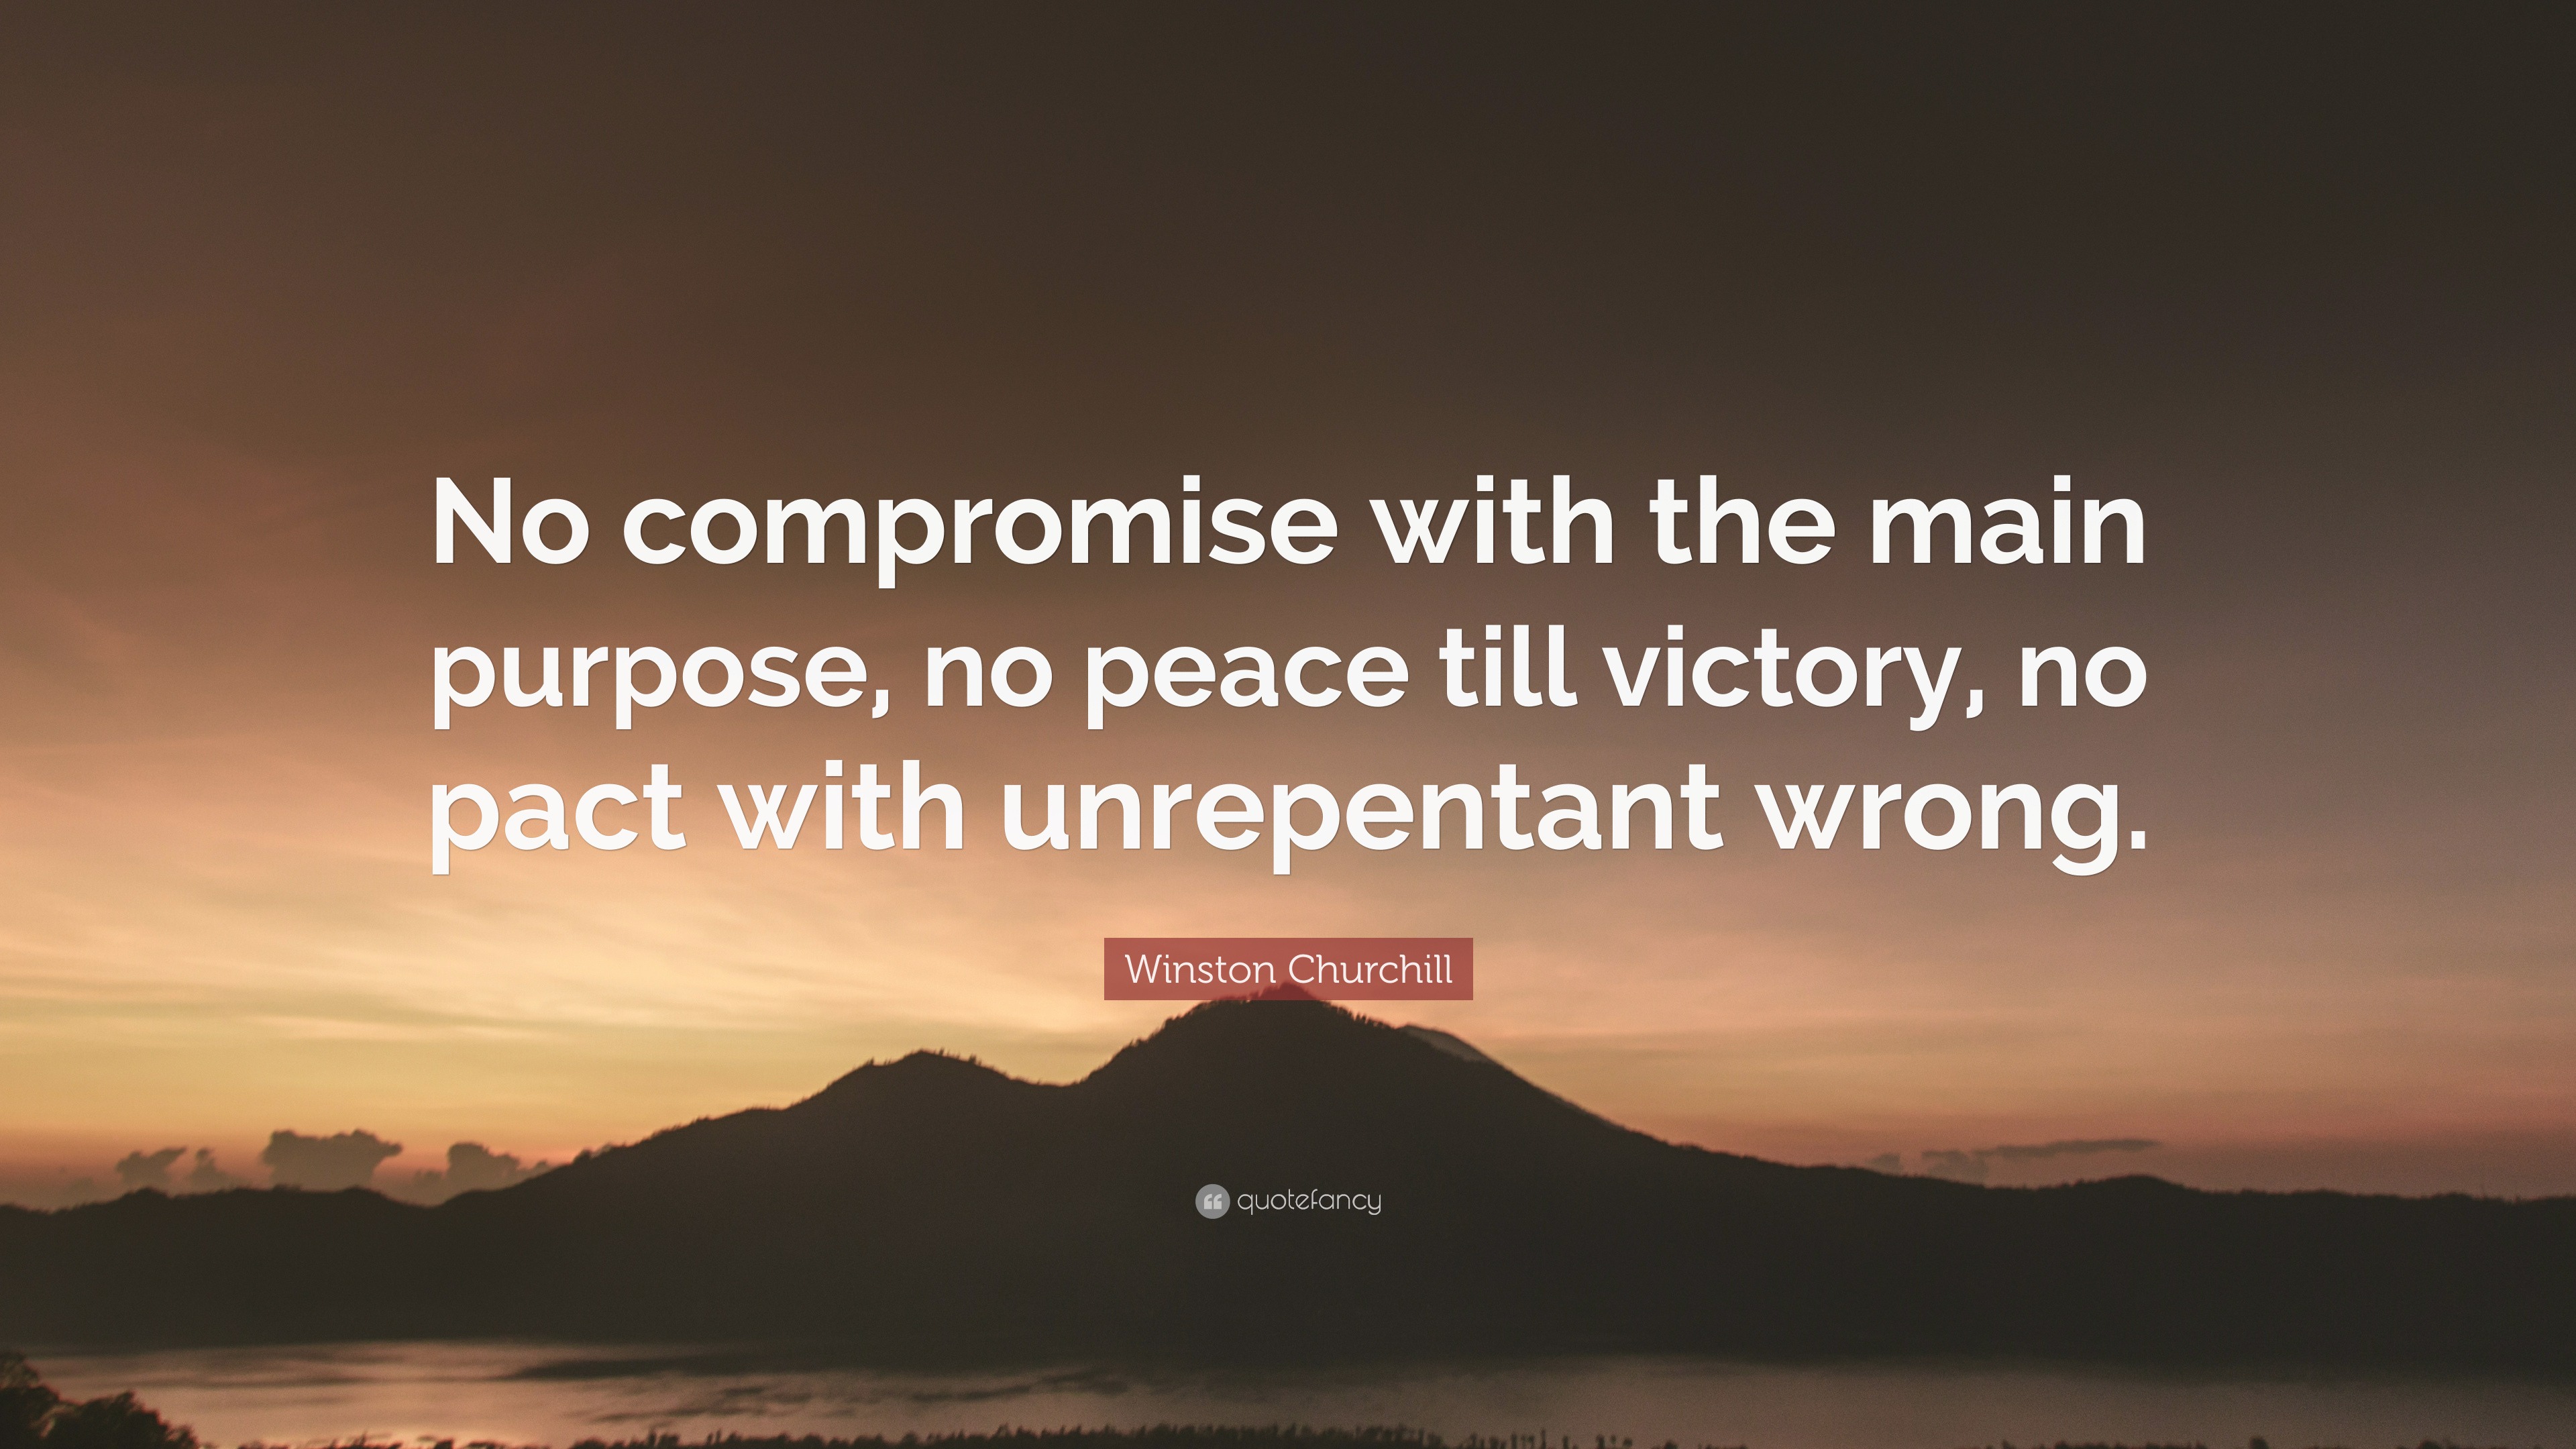 Winston Churchill Quote: “No compromise with the main purpose, no peace  till victory, no pact with